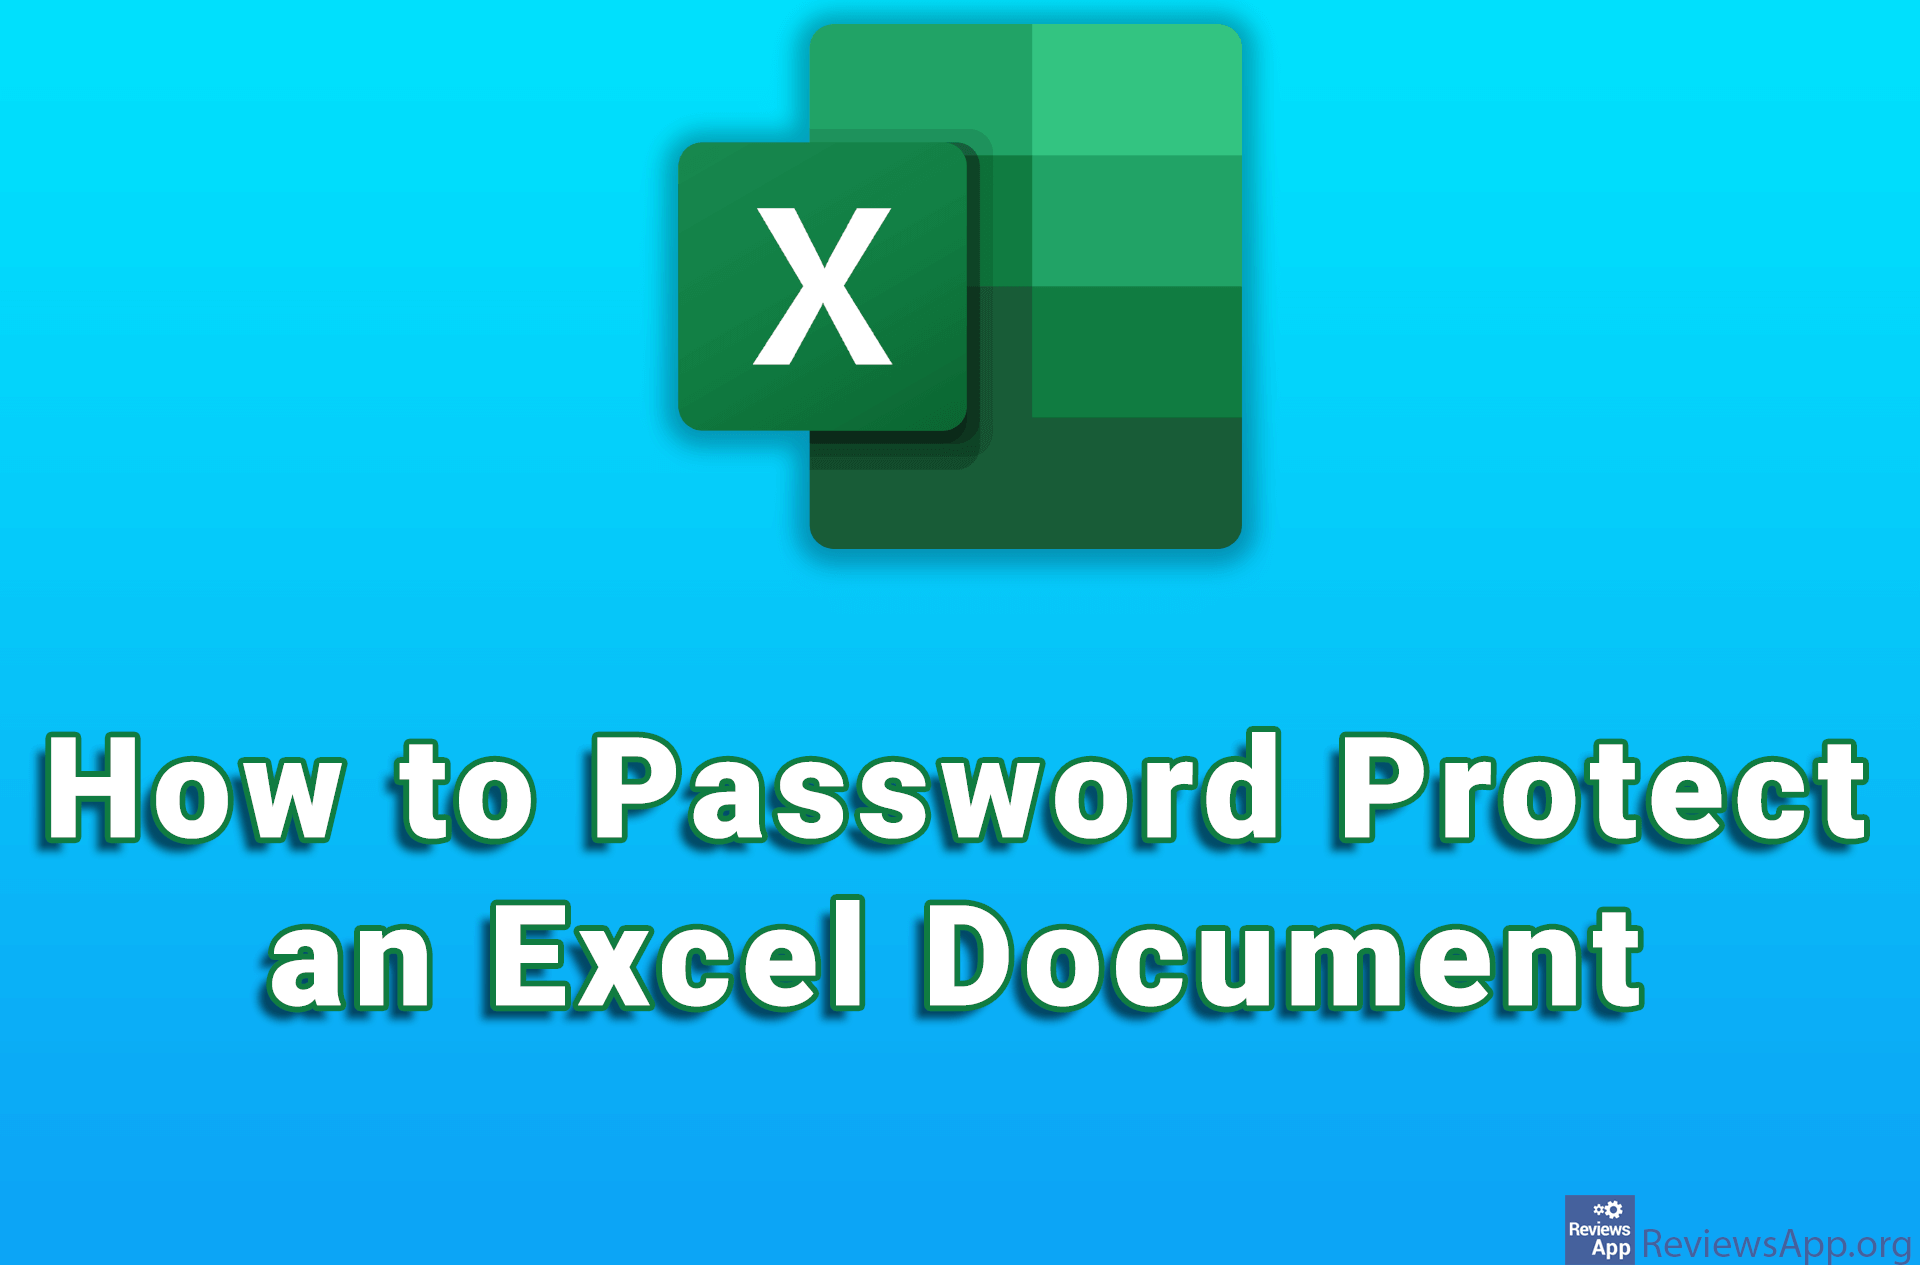 How to Password Protect an Excel Document